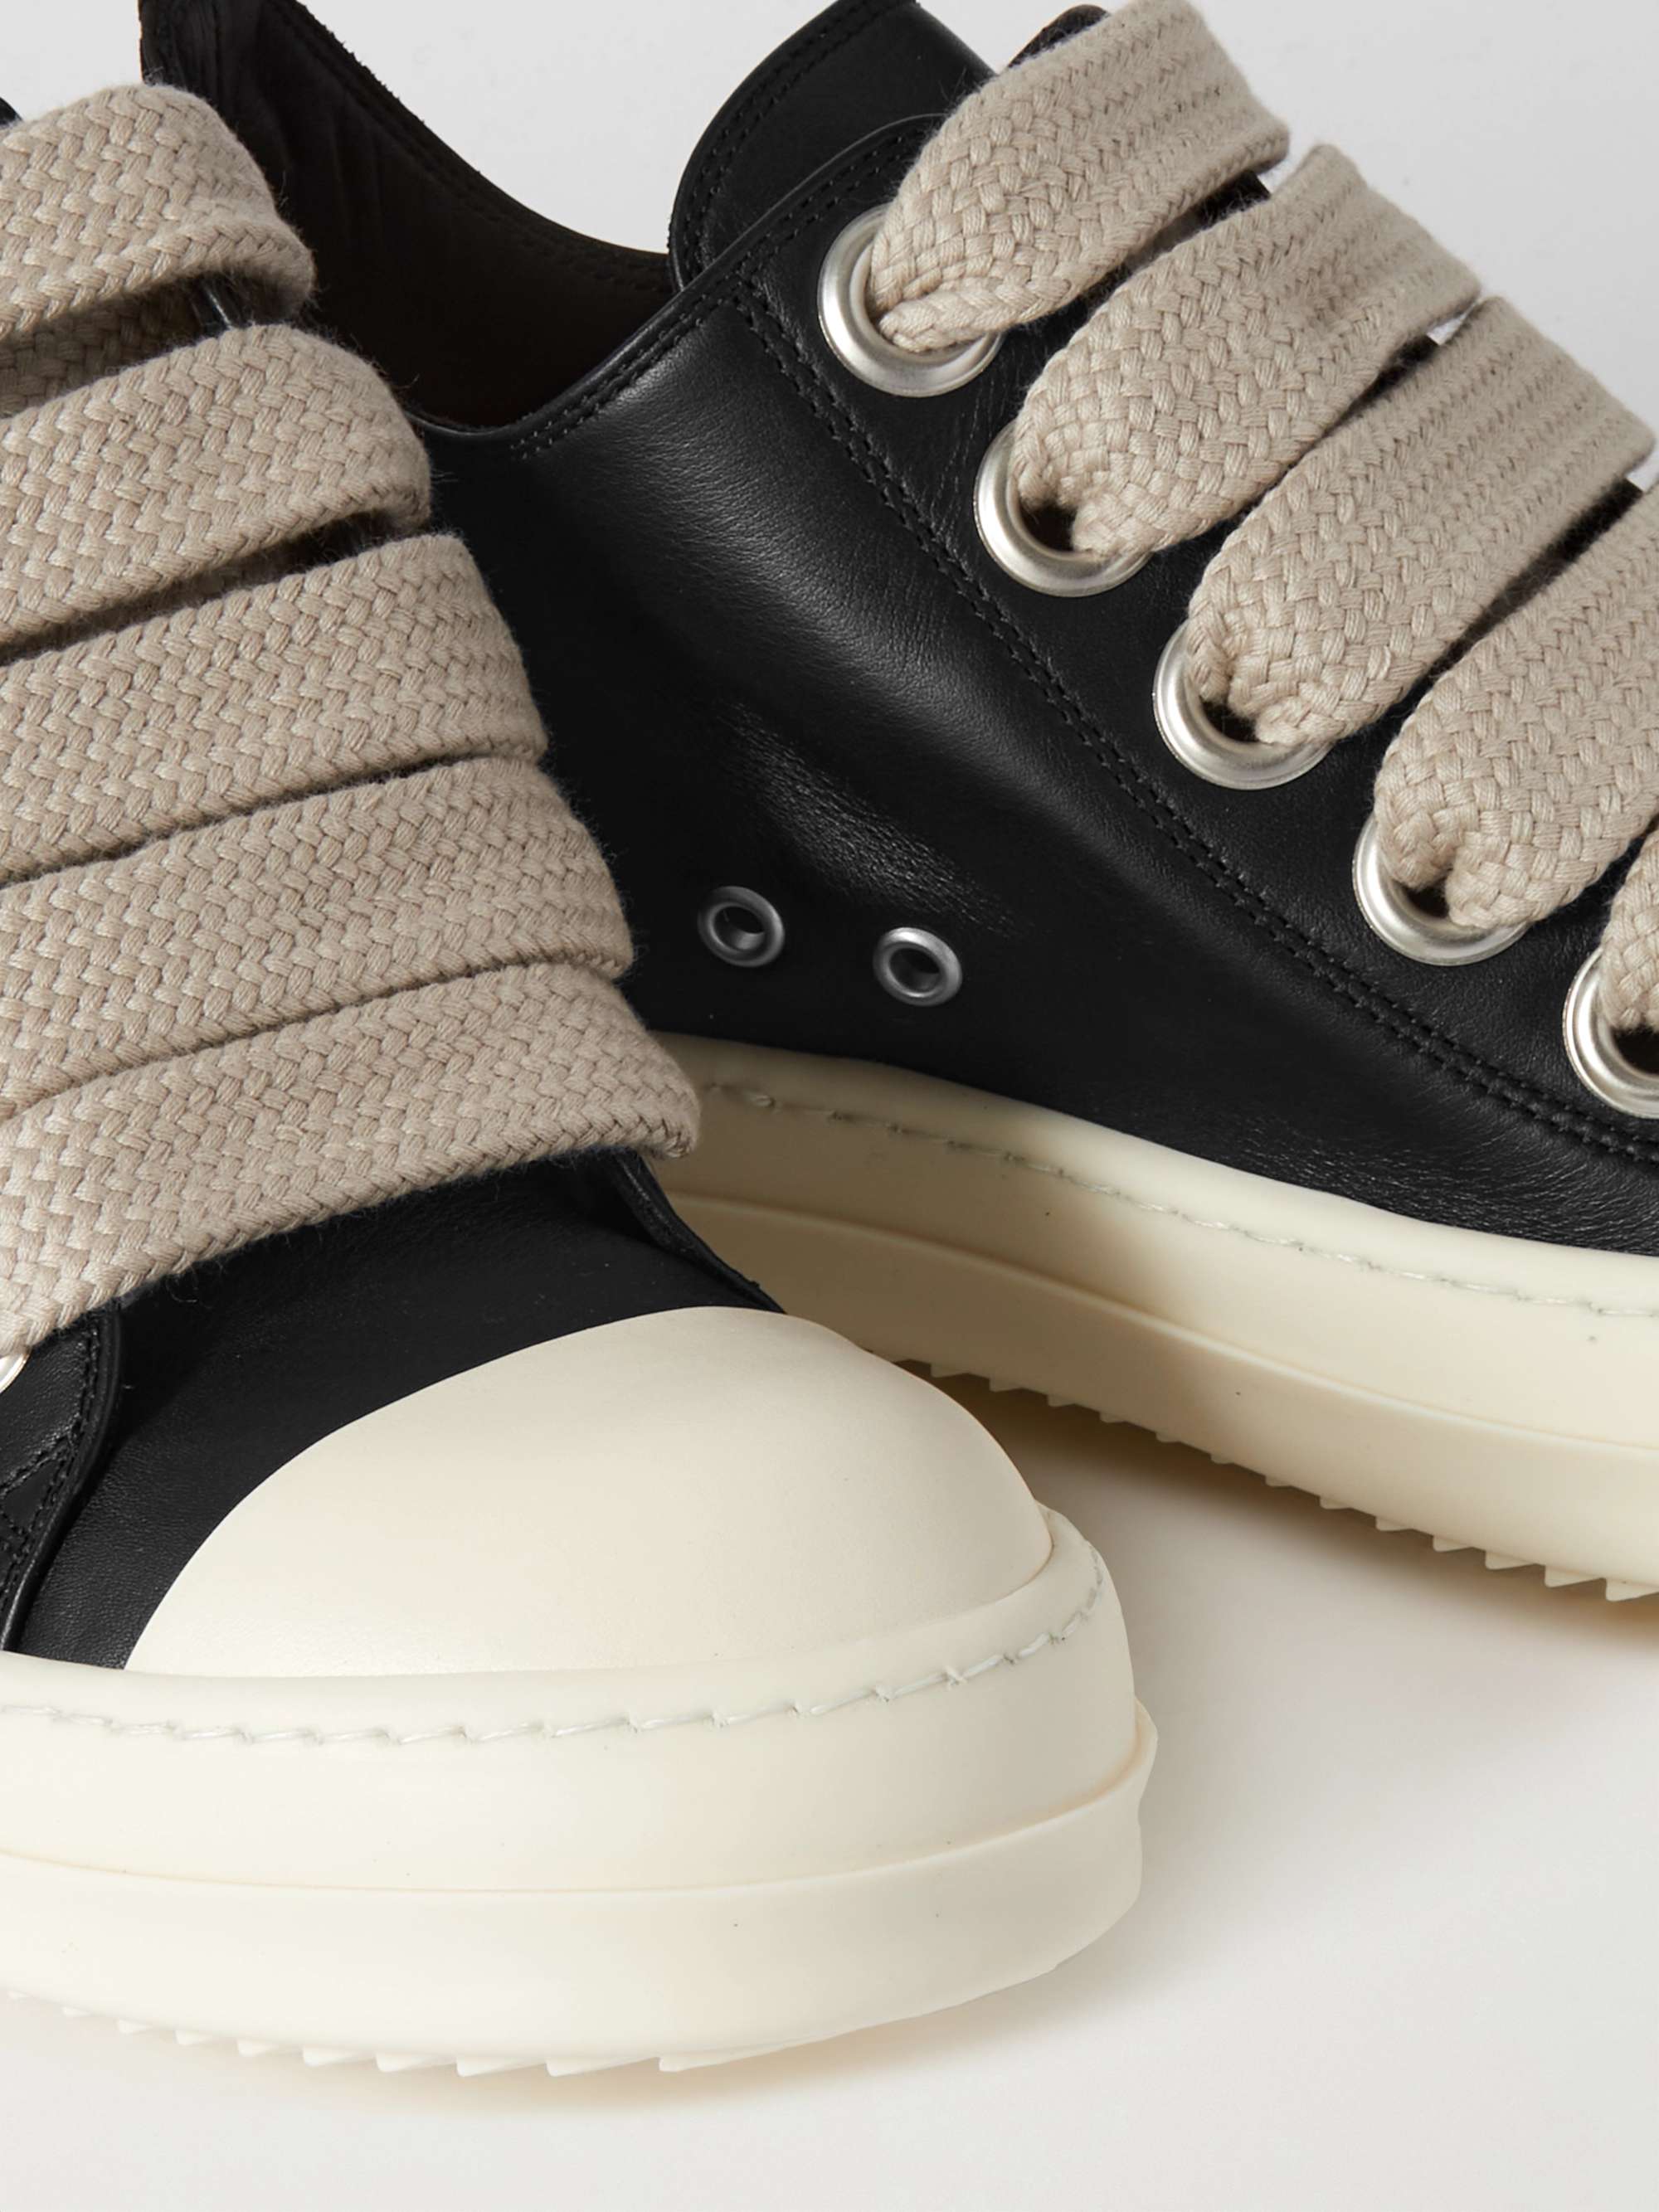 RICK OWENS Rubber-Trimmed Leather Sneakers